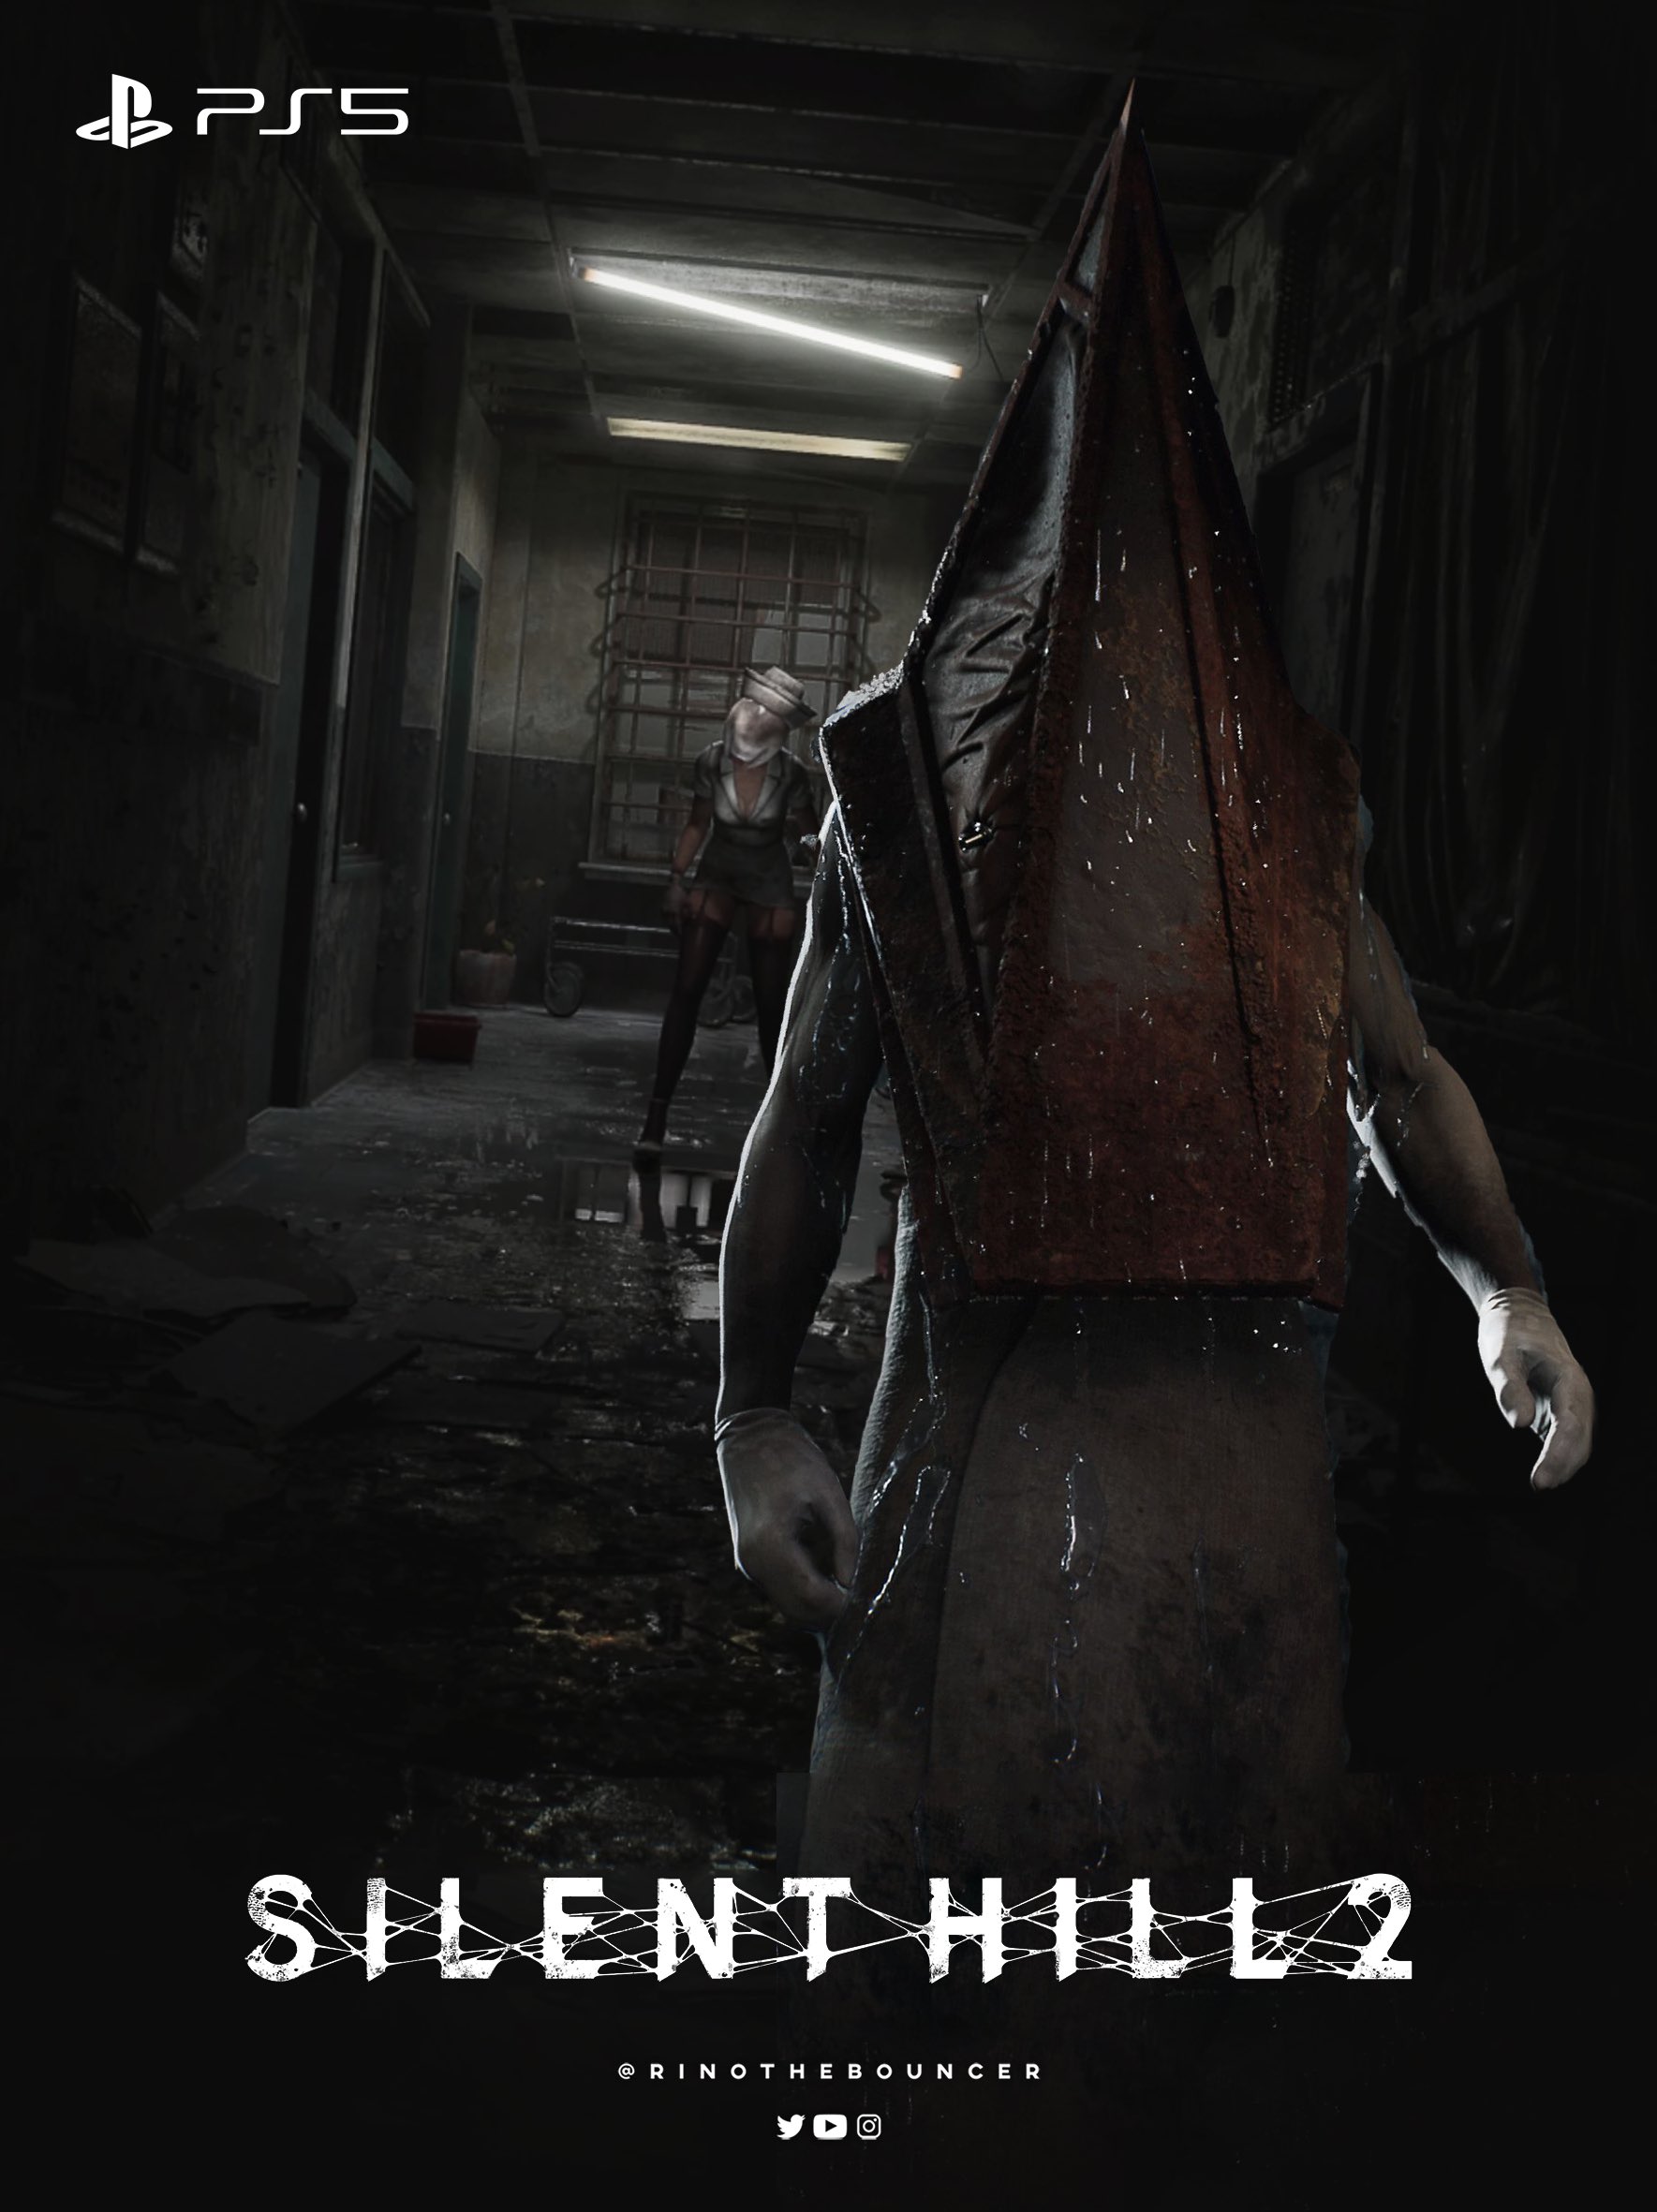 Rino on Twitter: "Silent Hill 2 🌫️🔦 Gameplay reveal at #PlayStation Showcase next week would be EPIC🚀 Here's everything we know so far🔥 ✓Konami was “wowed” Bloober Team's concept for the